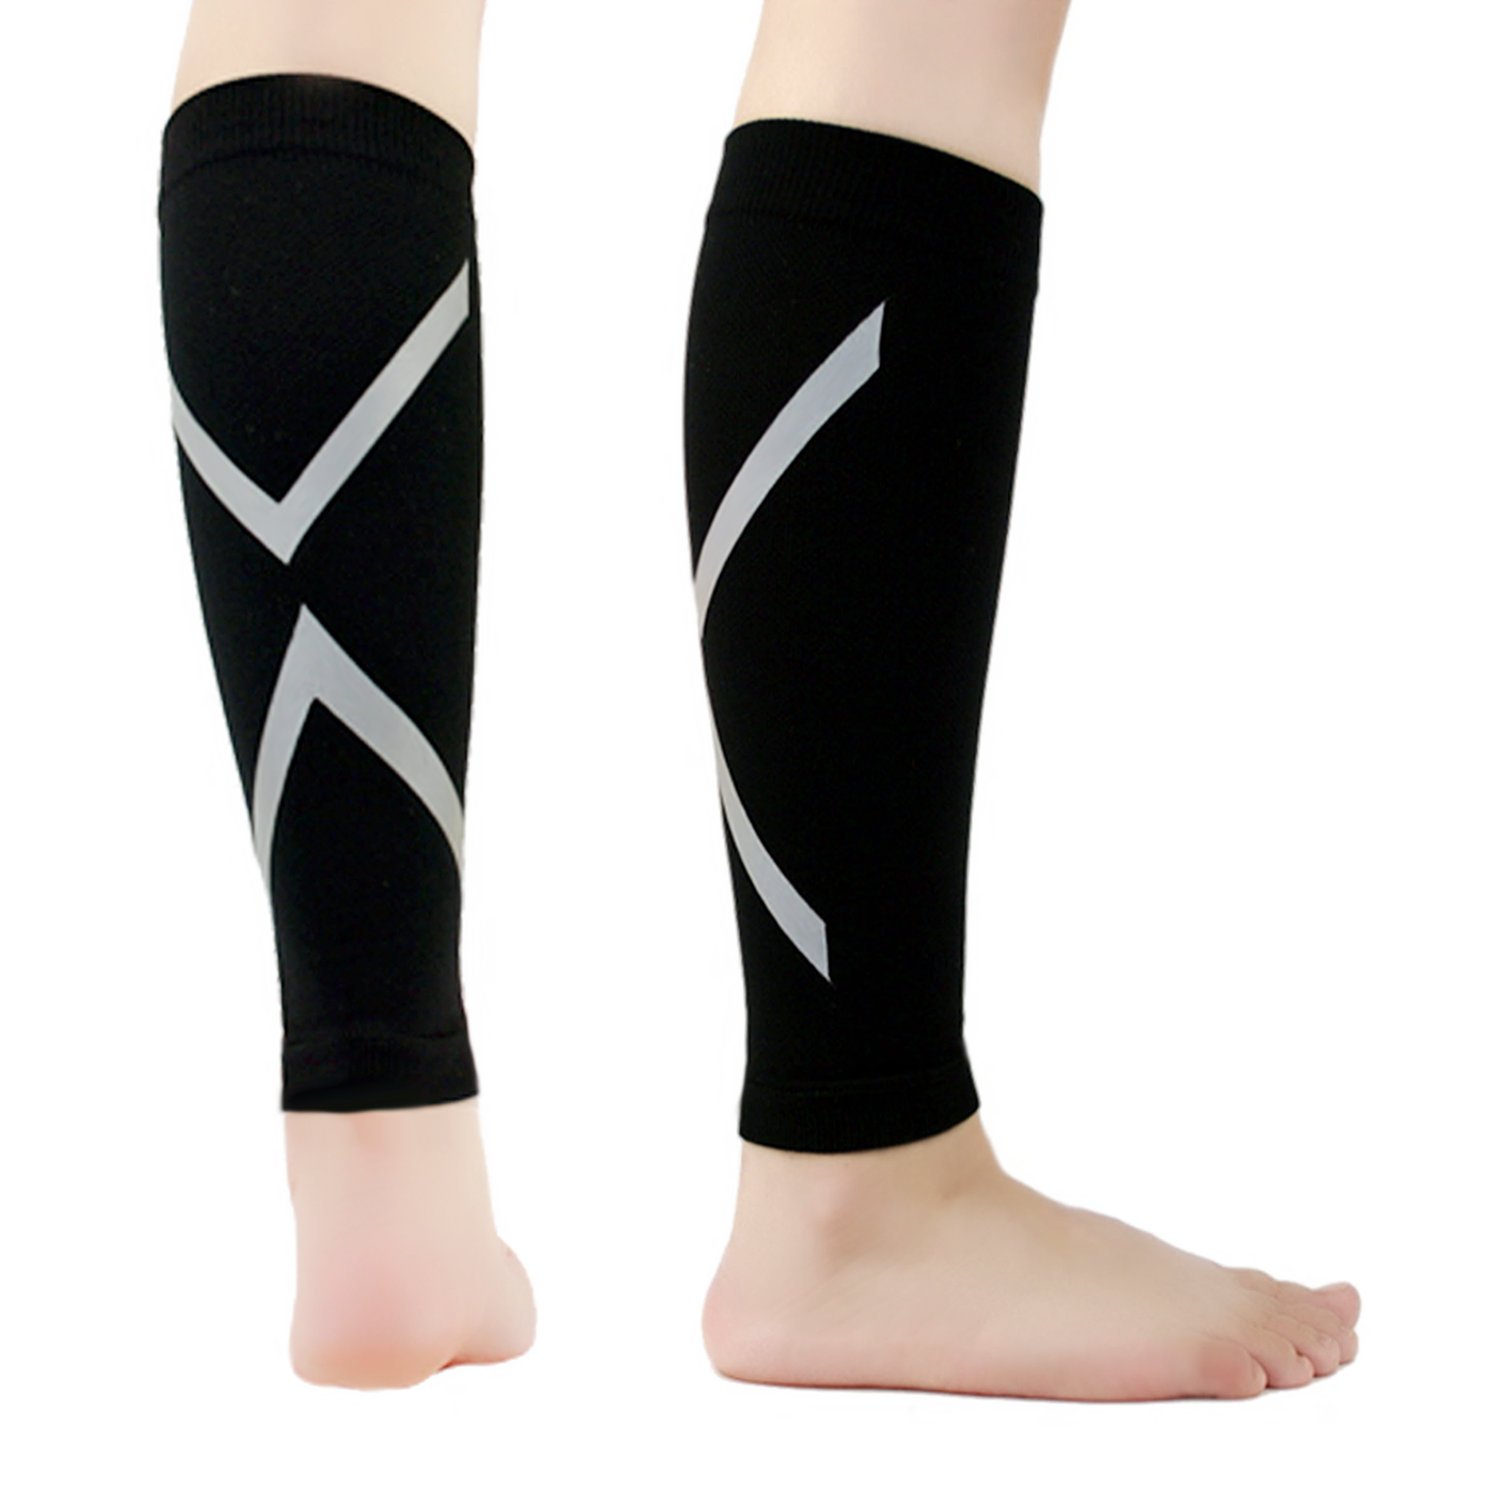 Calf Compression sleeves for running-Size Medium